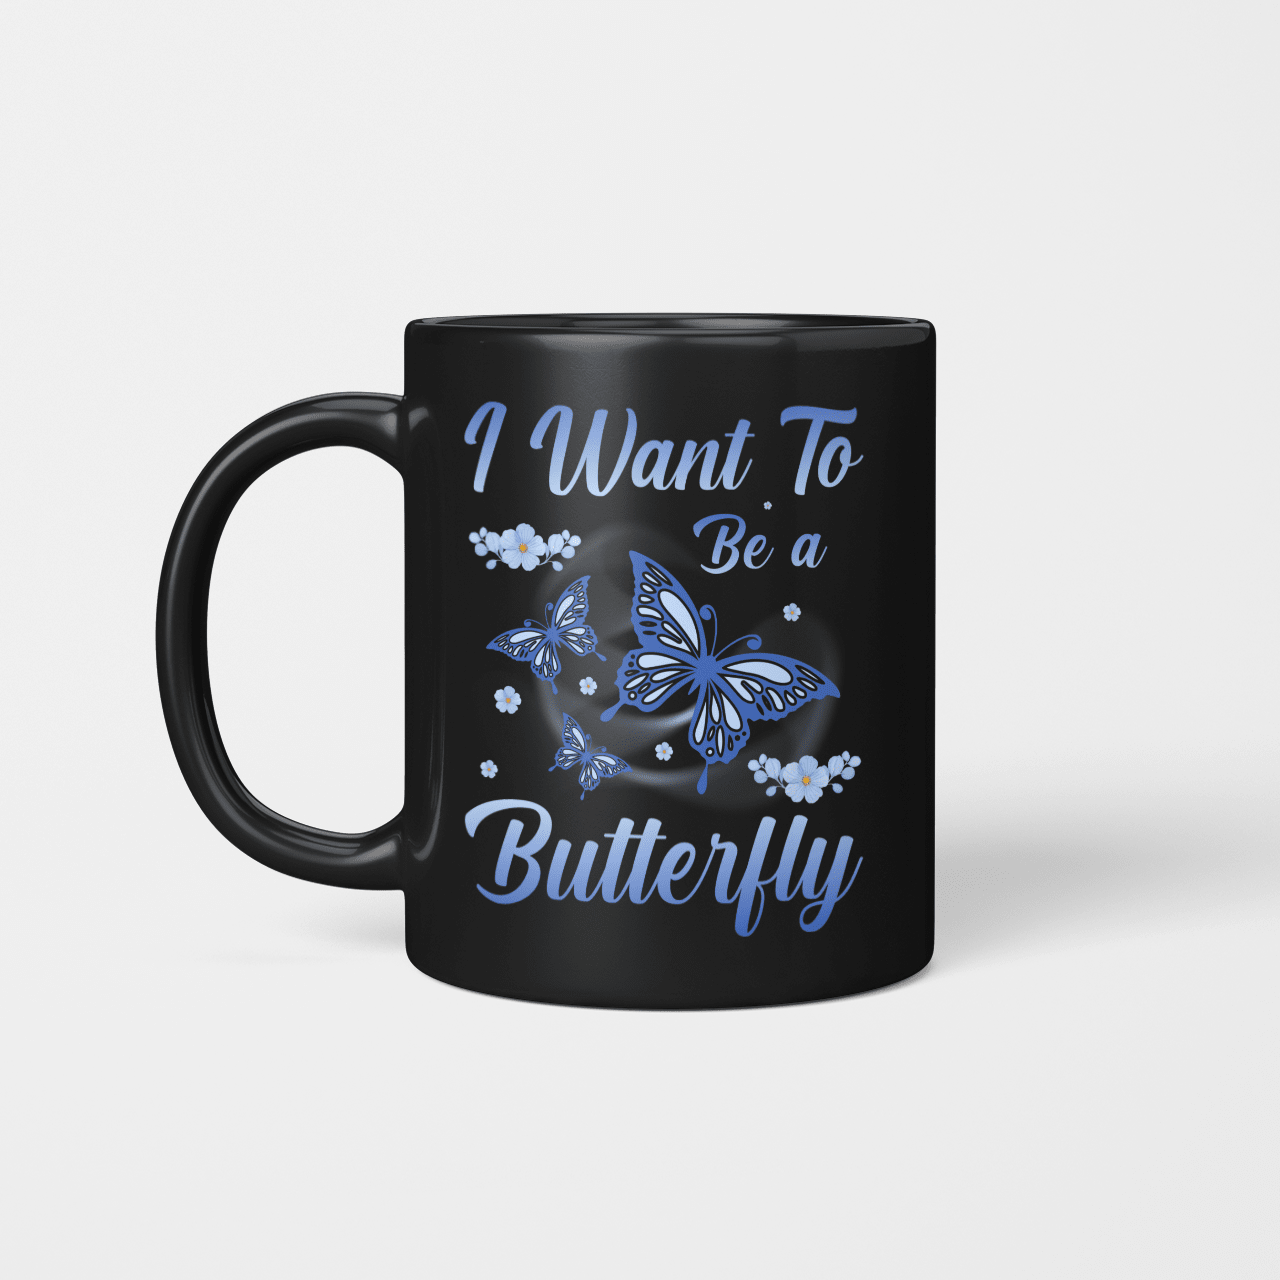 I Want to Be a Butterfly mug